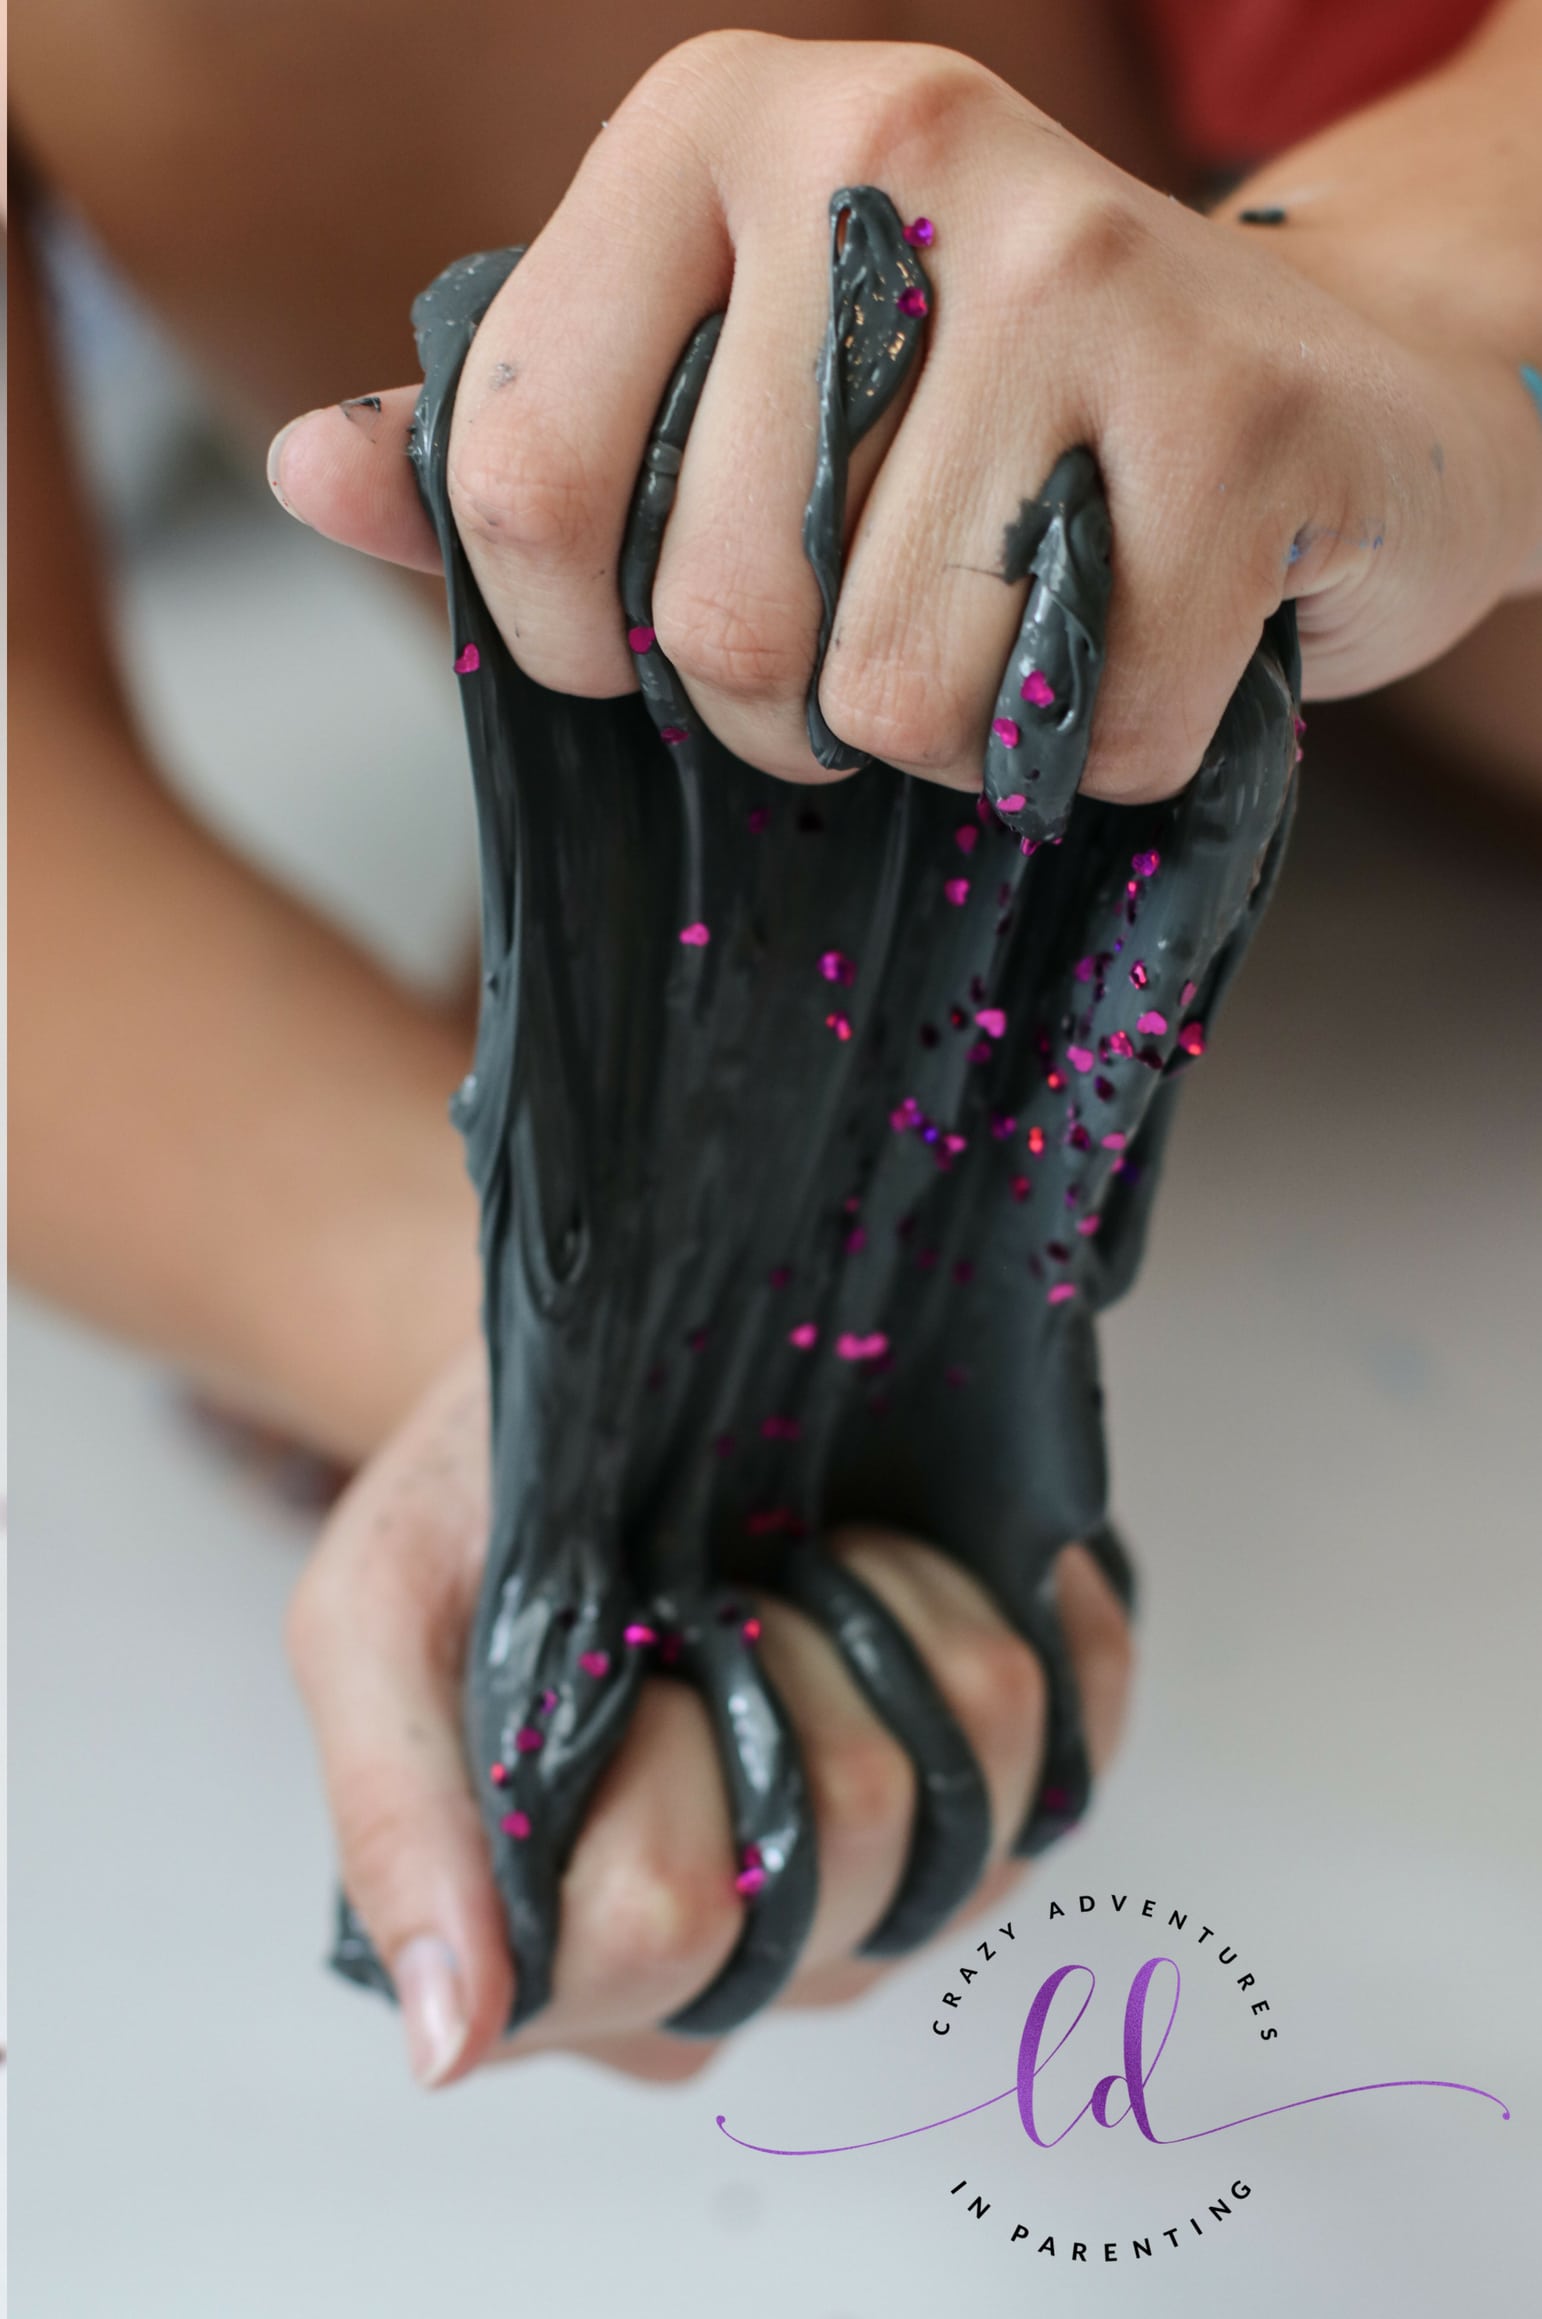 Play with Oil Slick Slime